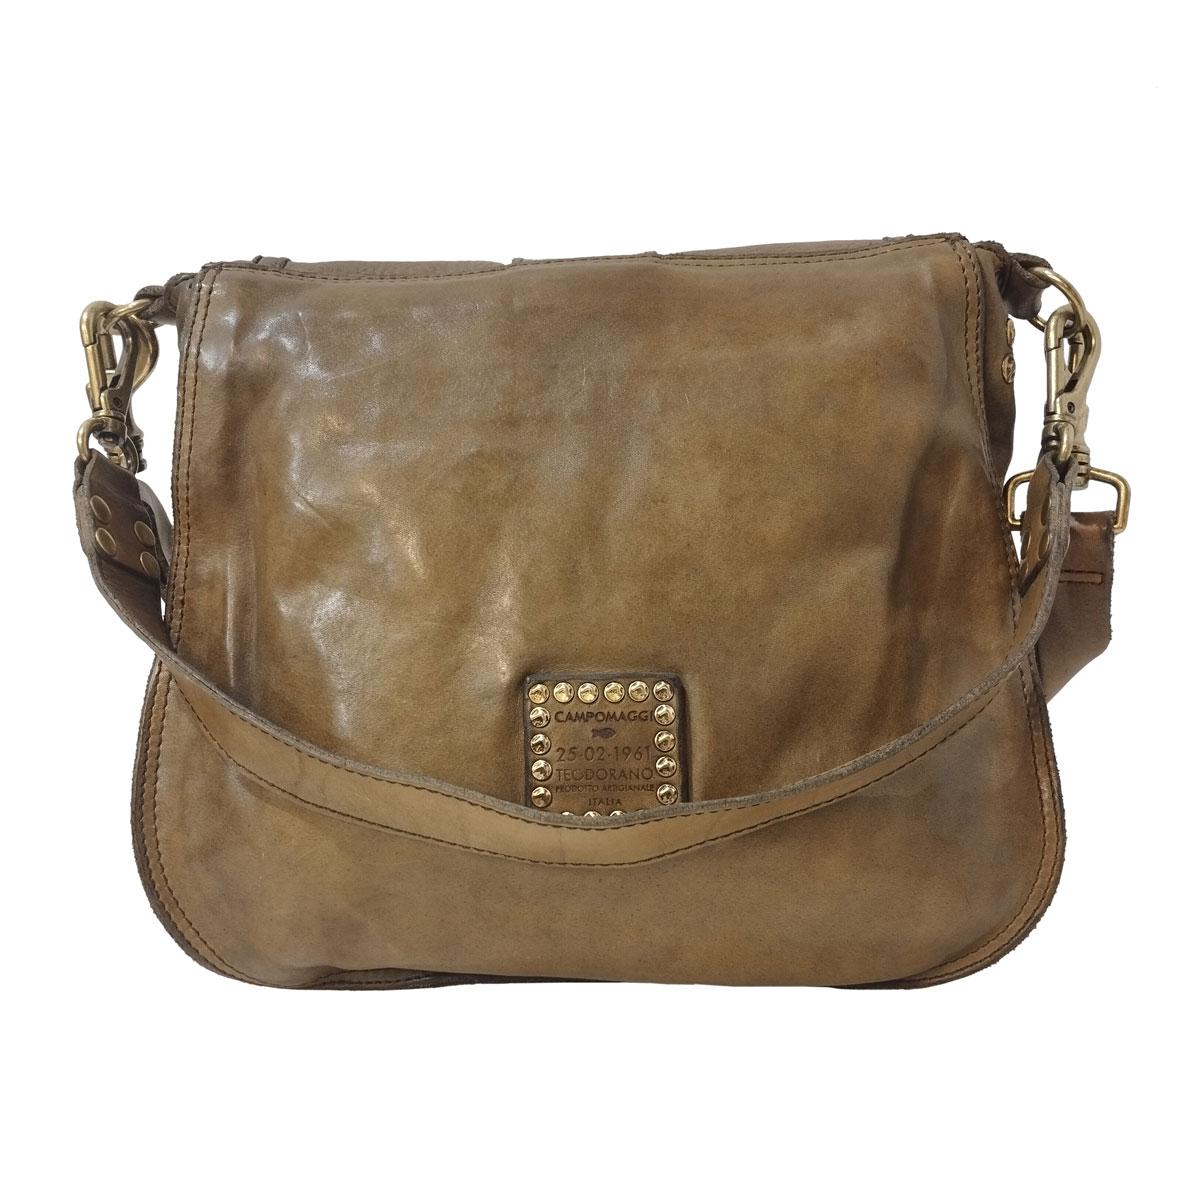 Beautiful and easy to wear italian manufactured bag
Leather bag from Campomaggi Italy
